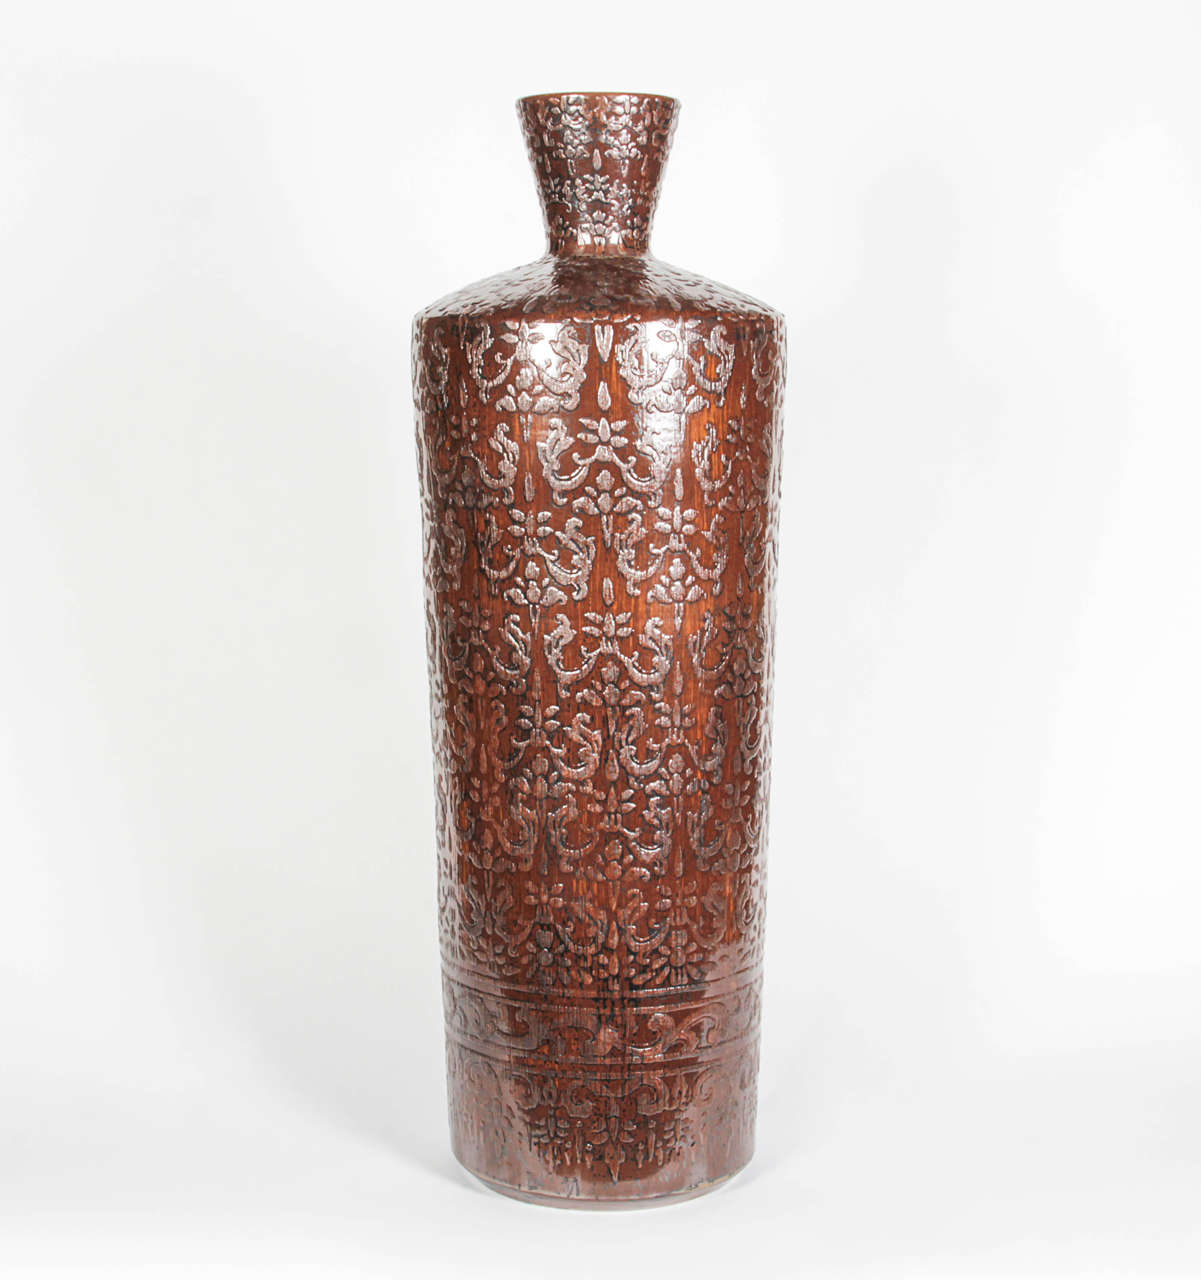 Large dark brown Thai ceramic vessel with shiny finish. Curated and personally selected by Donna Karan for her Urban Zen brand.